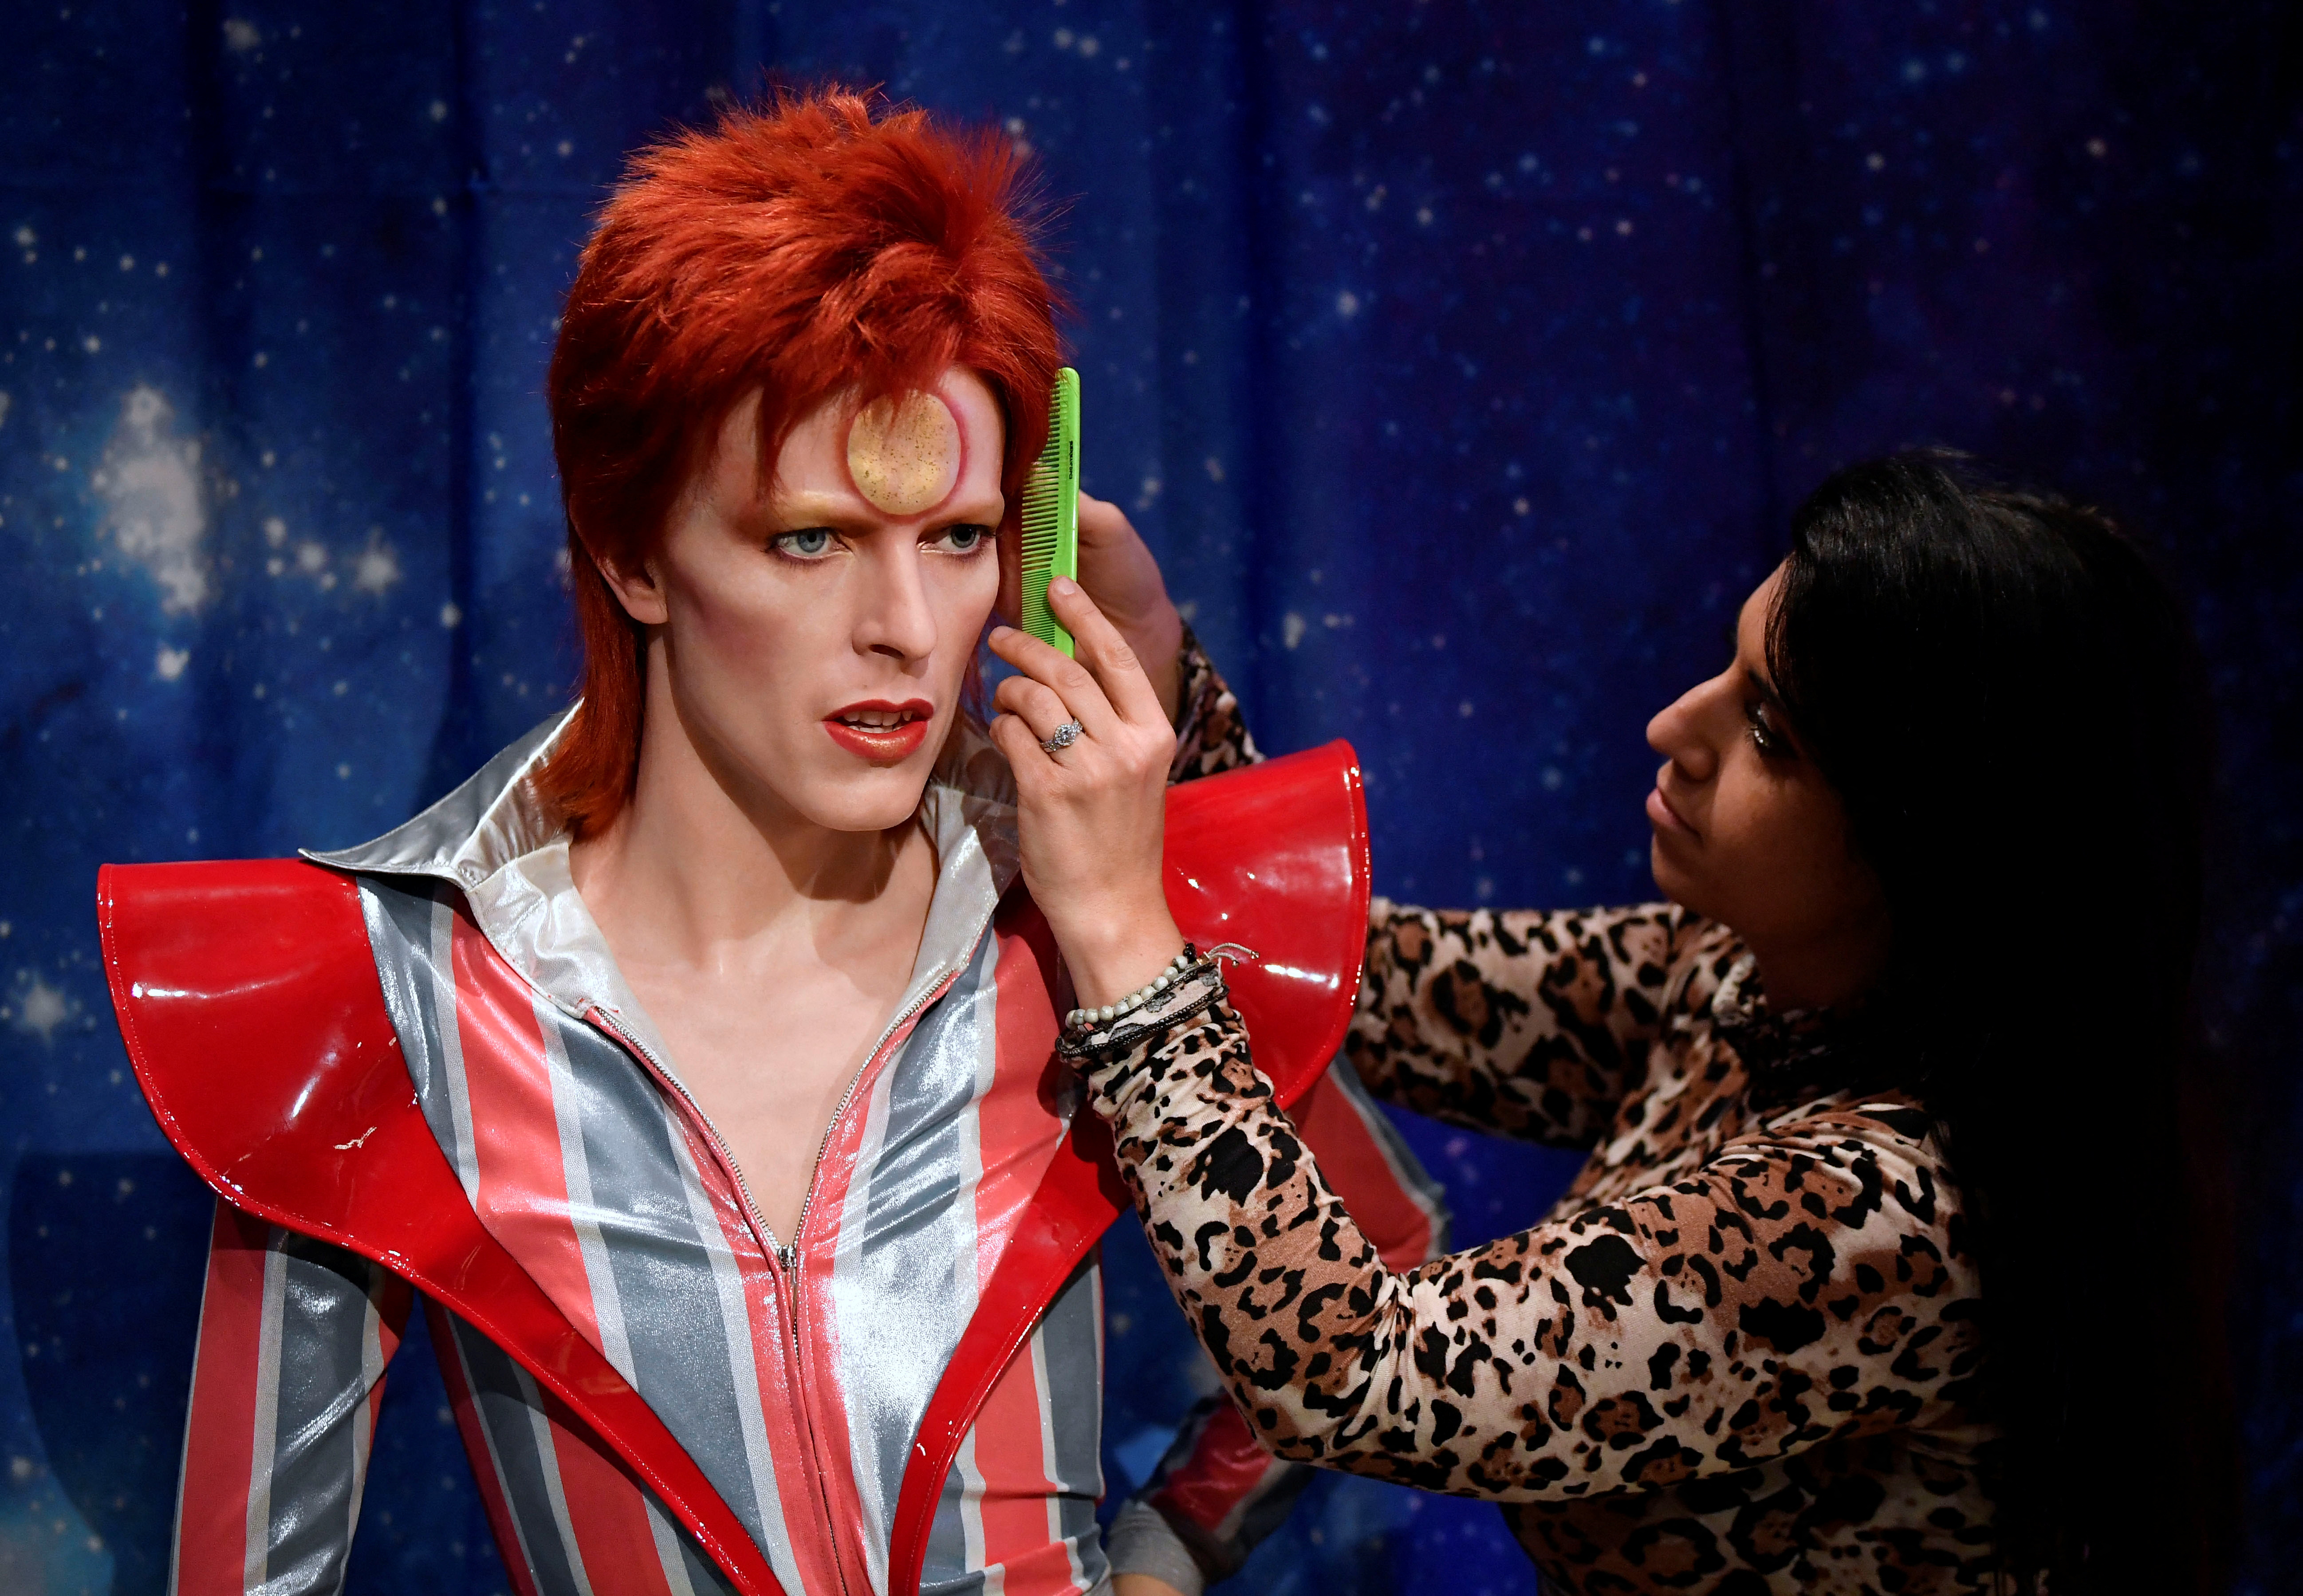 New wax work of David Bowie in redesigned Music Festival zone at Madame Tussauds in London